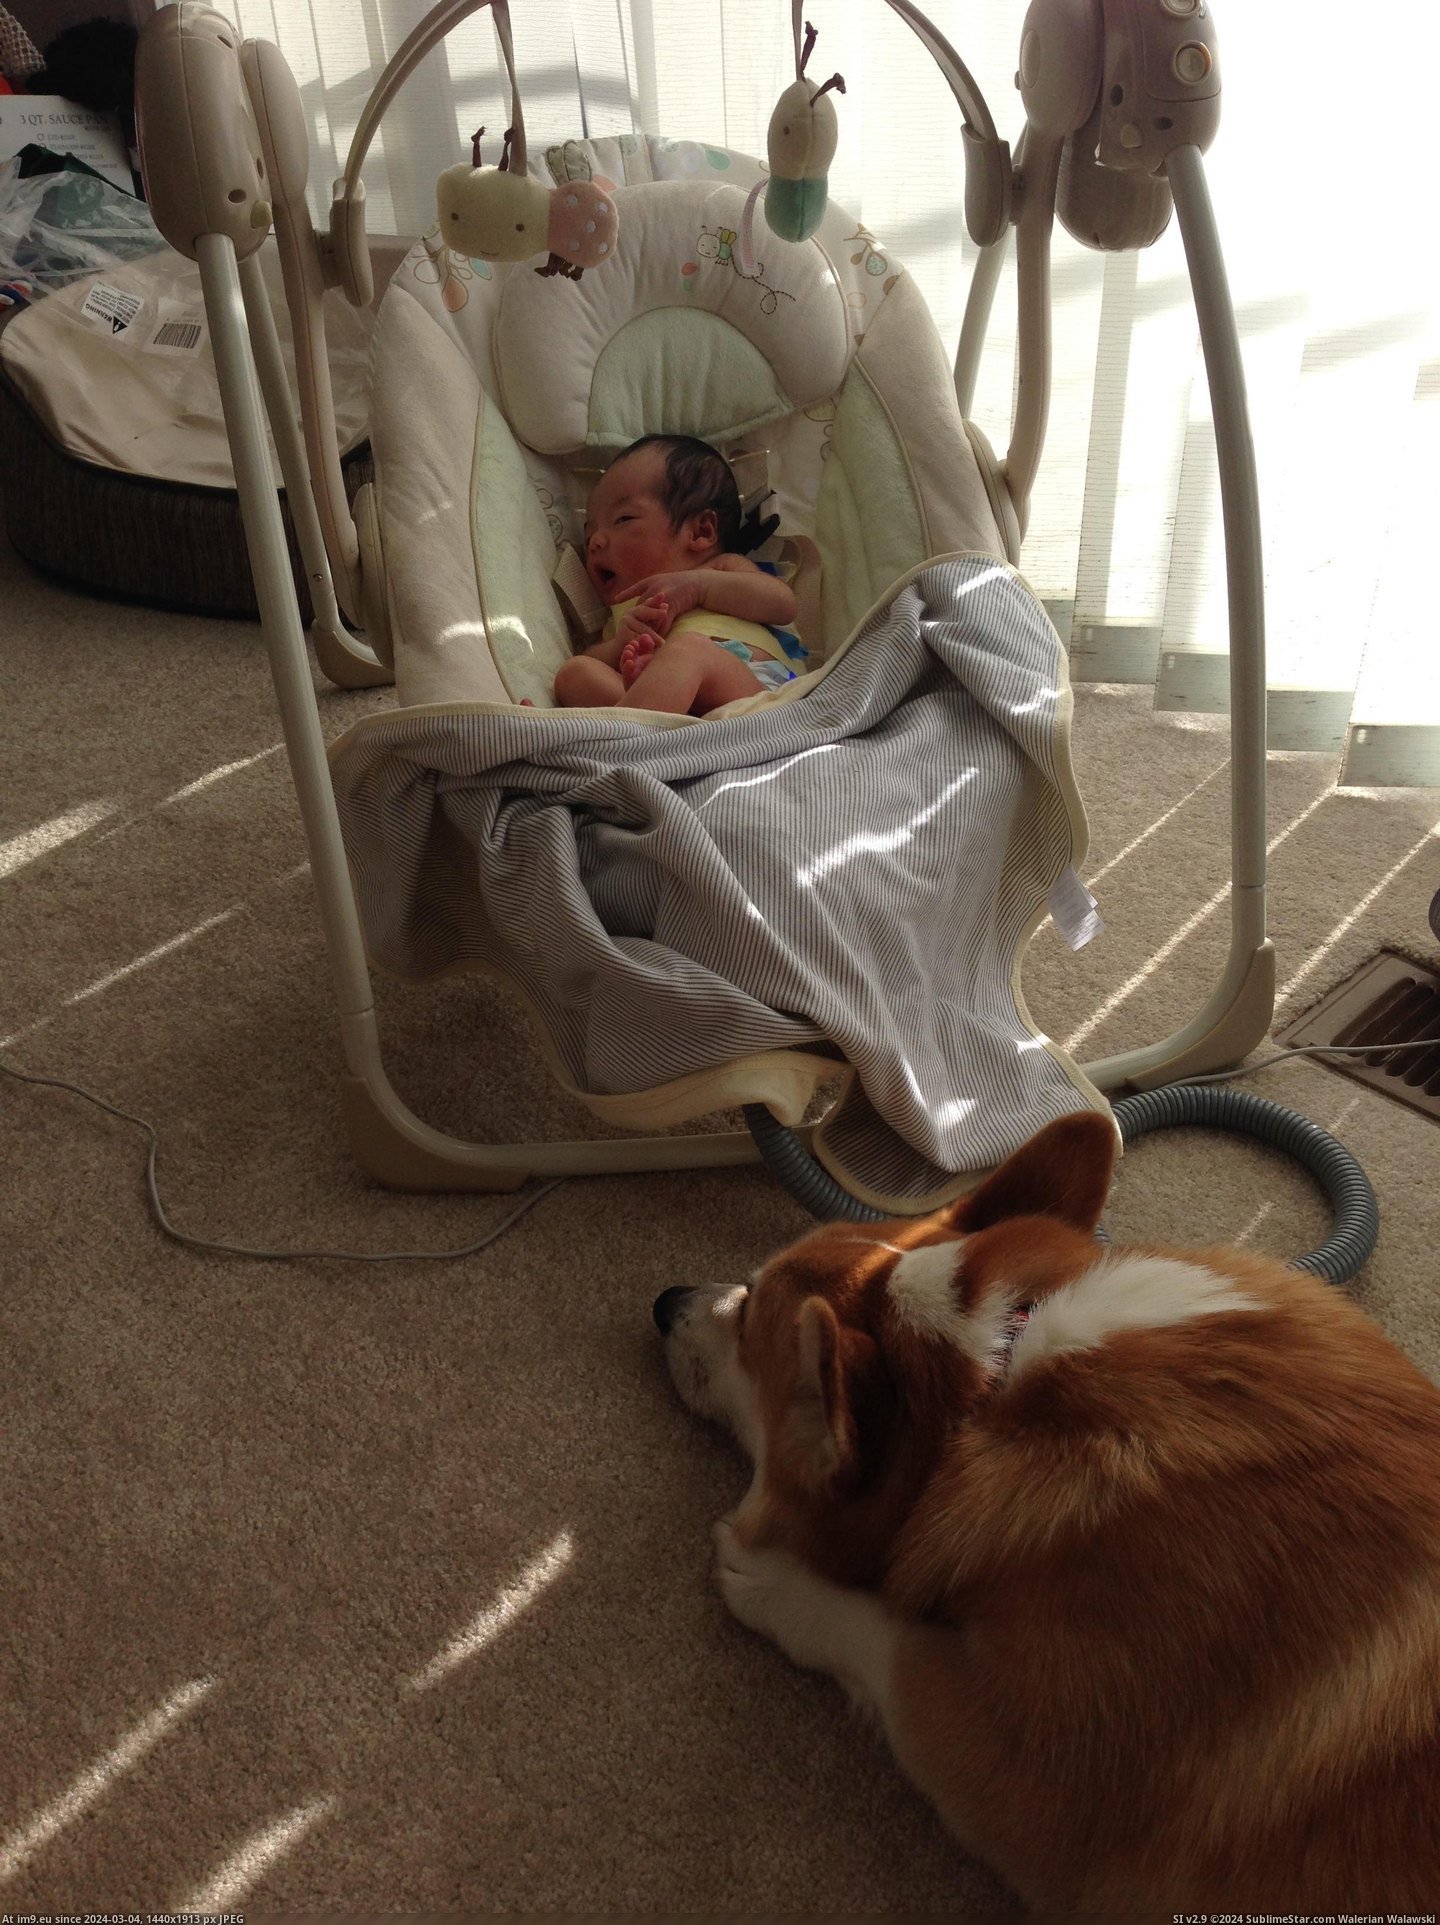 #Was #New #Ago #But #How #Daughter #Weeks #Born [Aww] My daughter was born three weeks ago. I worried about how my corgi would react but he's treating her like his new BFF... 6 Pic. (Obraz z album My r/AWW favs))